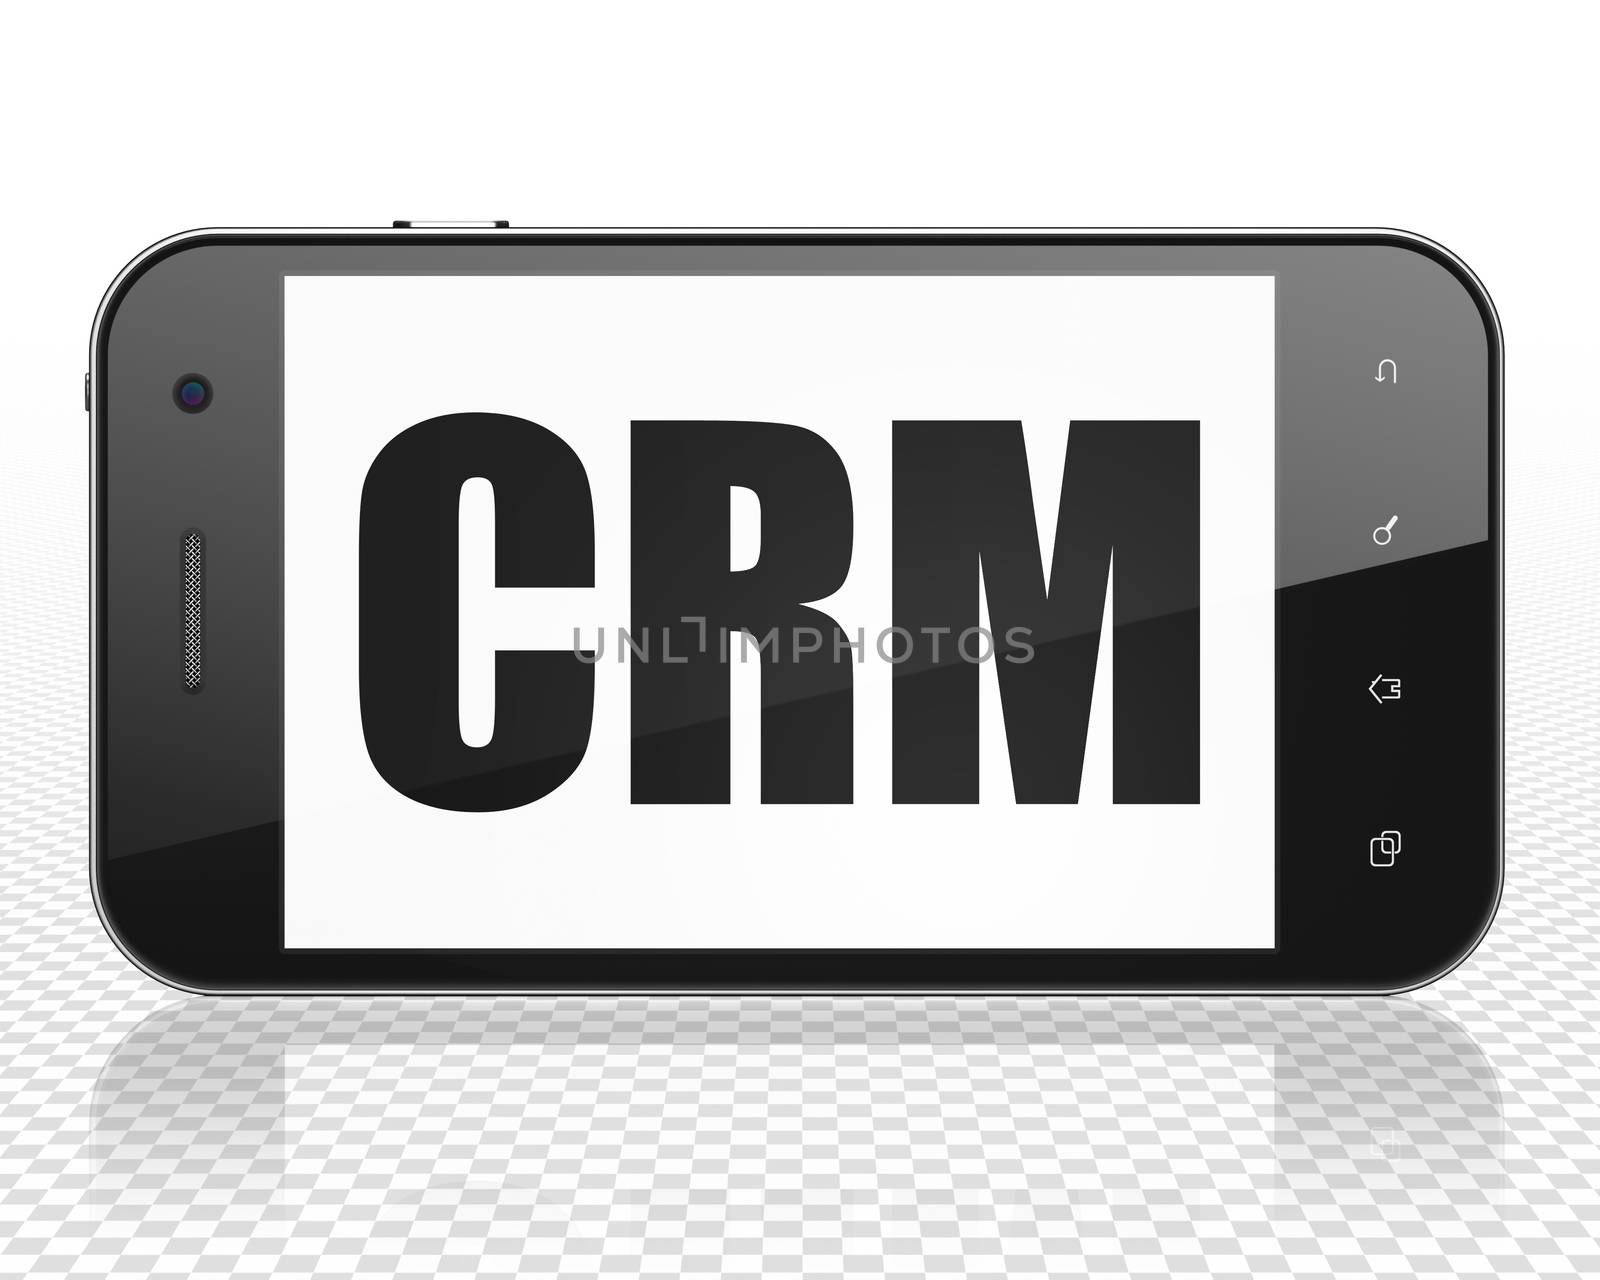 Business concept: Smartphone with black text CRM on display, 3D rendering